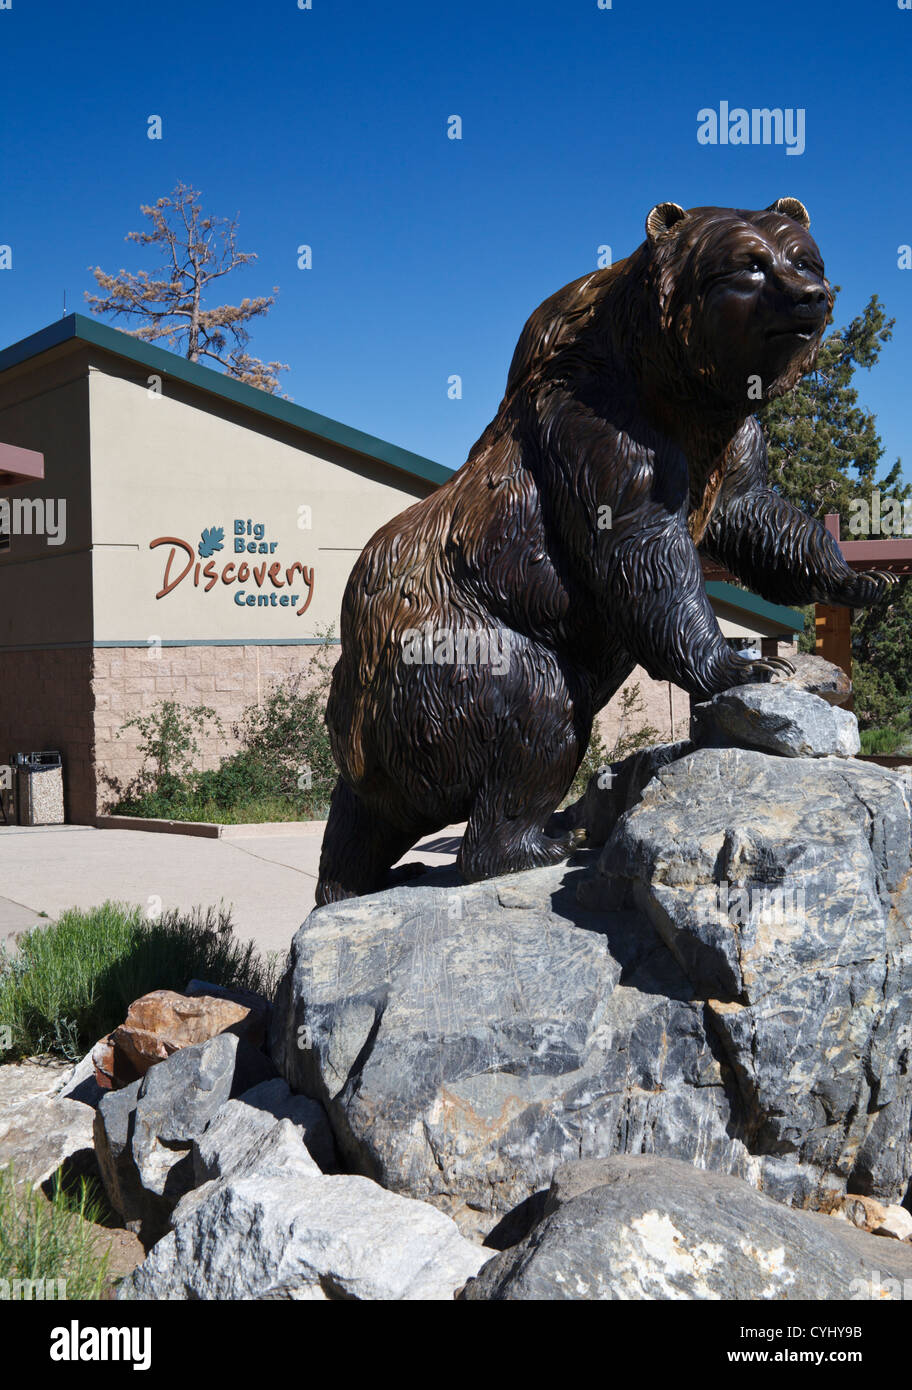 Grizzly bear sculpture at the Big Bear Discovery Center in Big Bear Lake, California Stock Photo